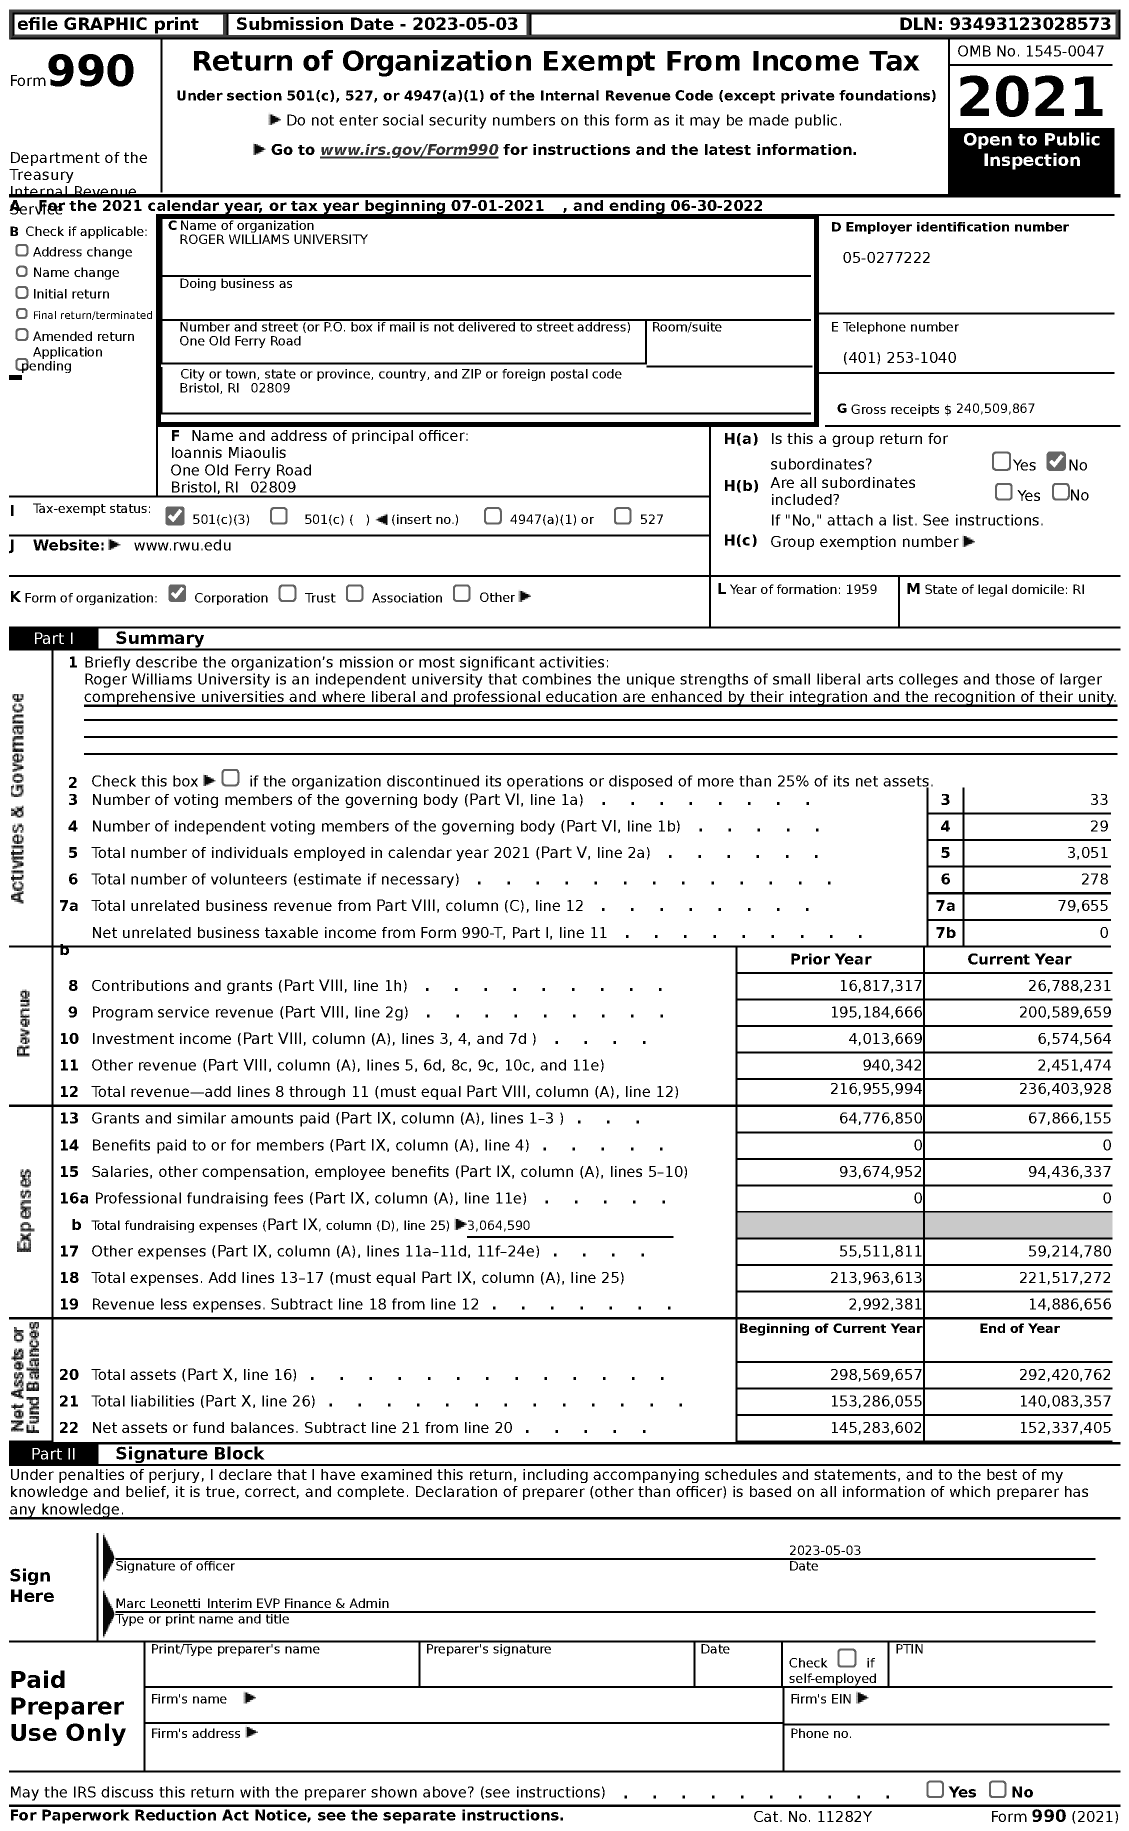 Image of first page of 2021 Form 990 for Roger Williams University (RWU)